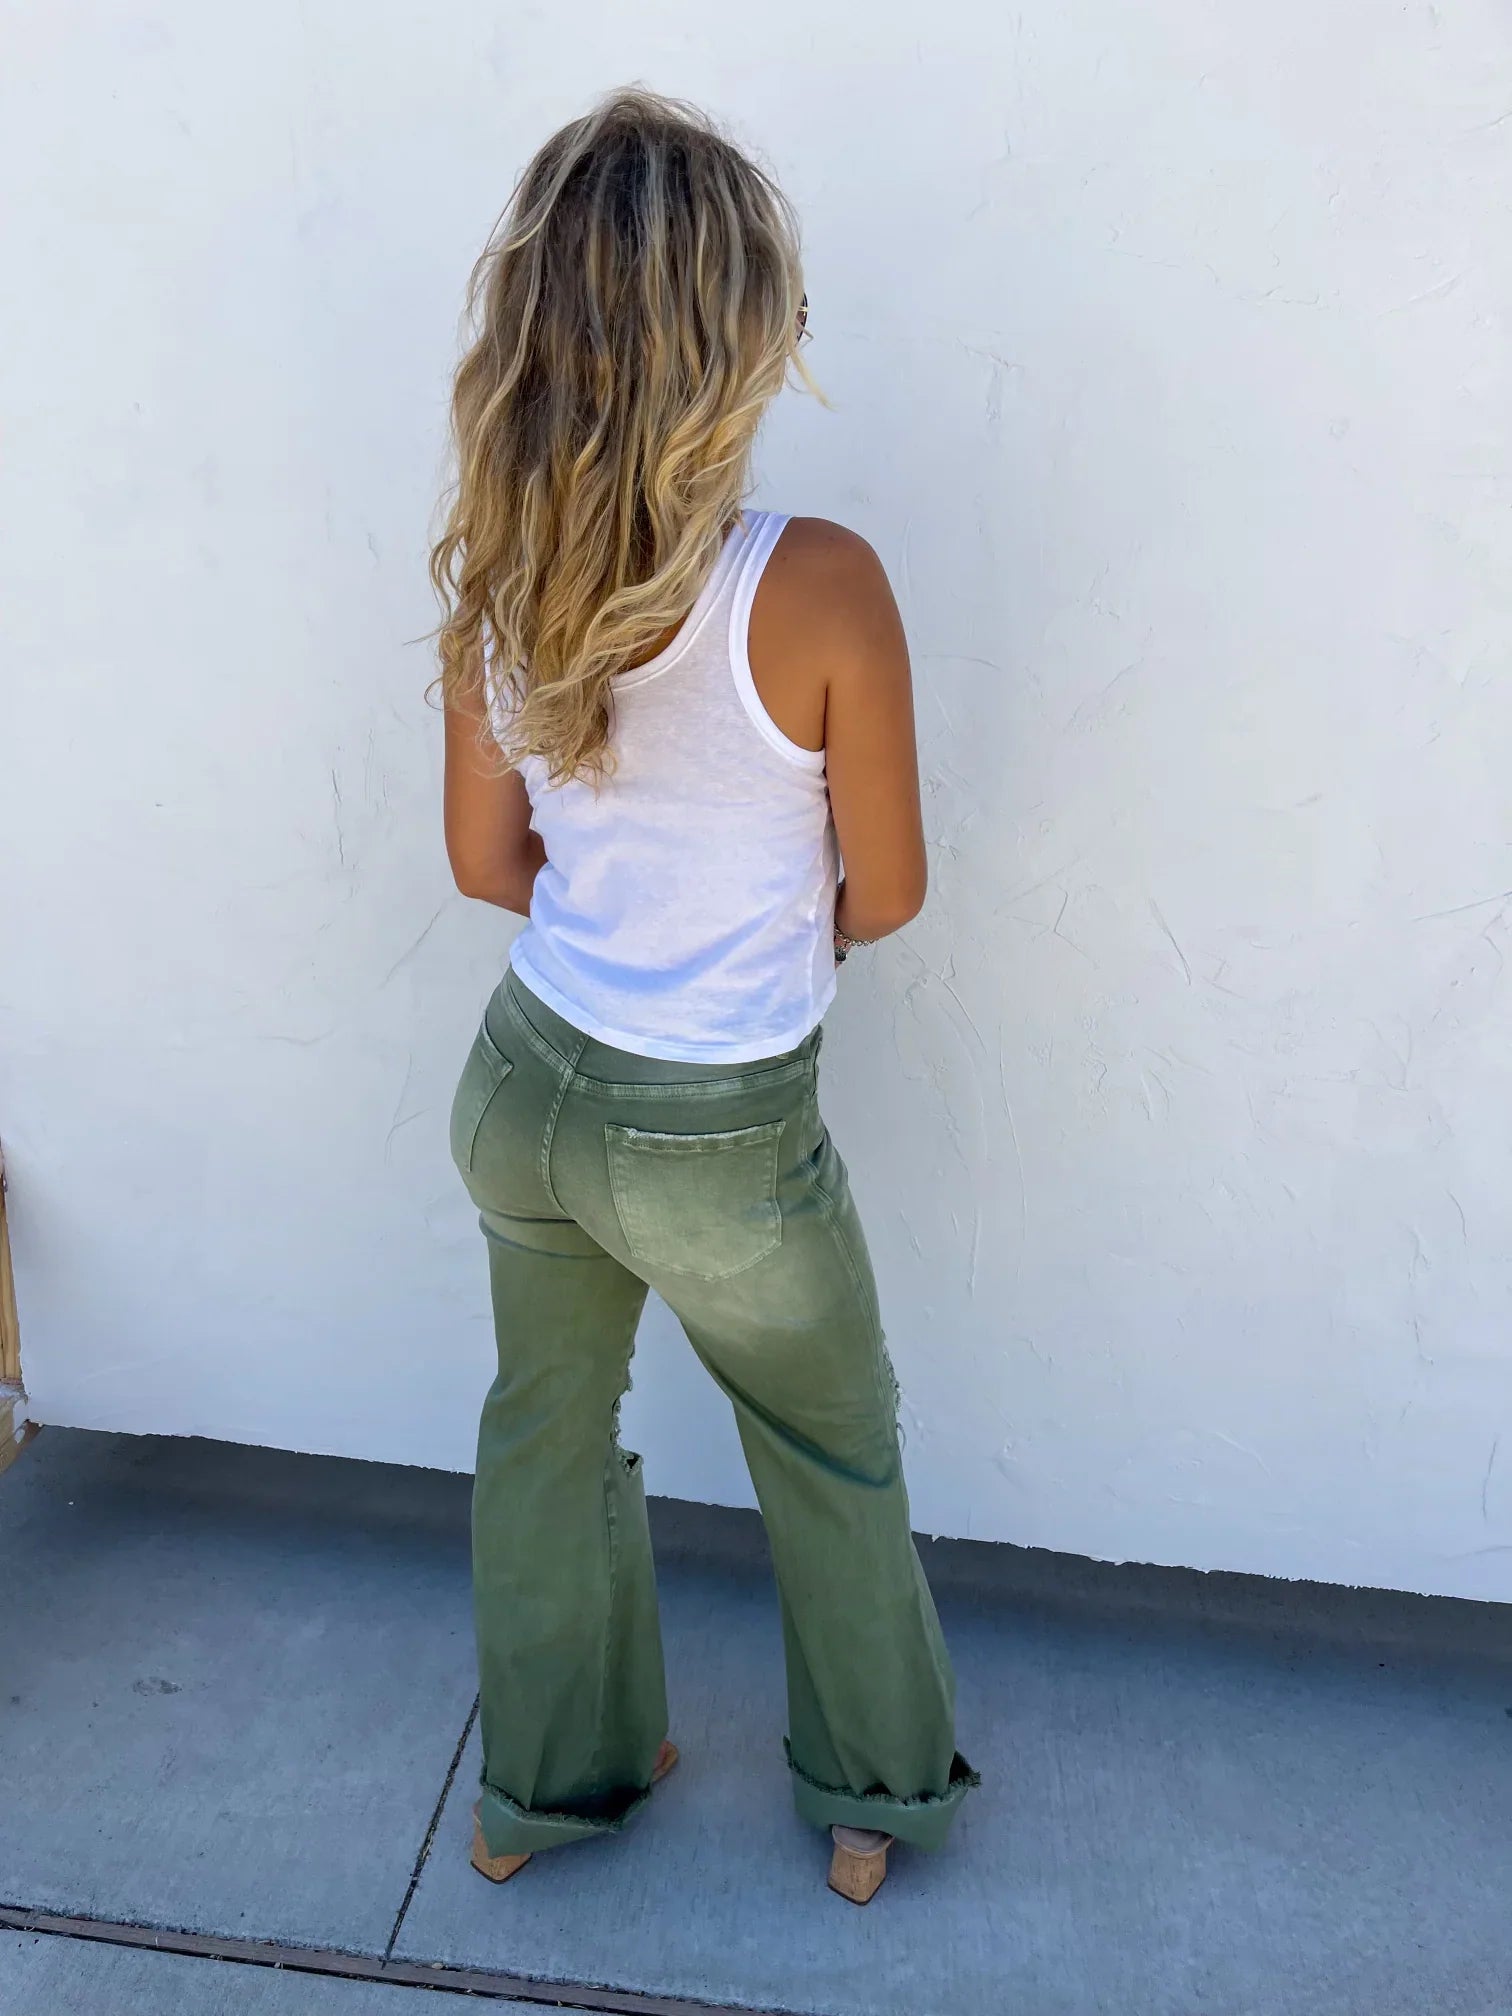 PREORDER: Blakeley Distressed Jeans In Olive and Camel Tall Inseam